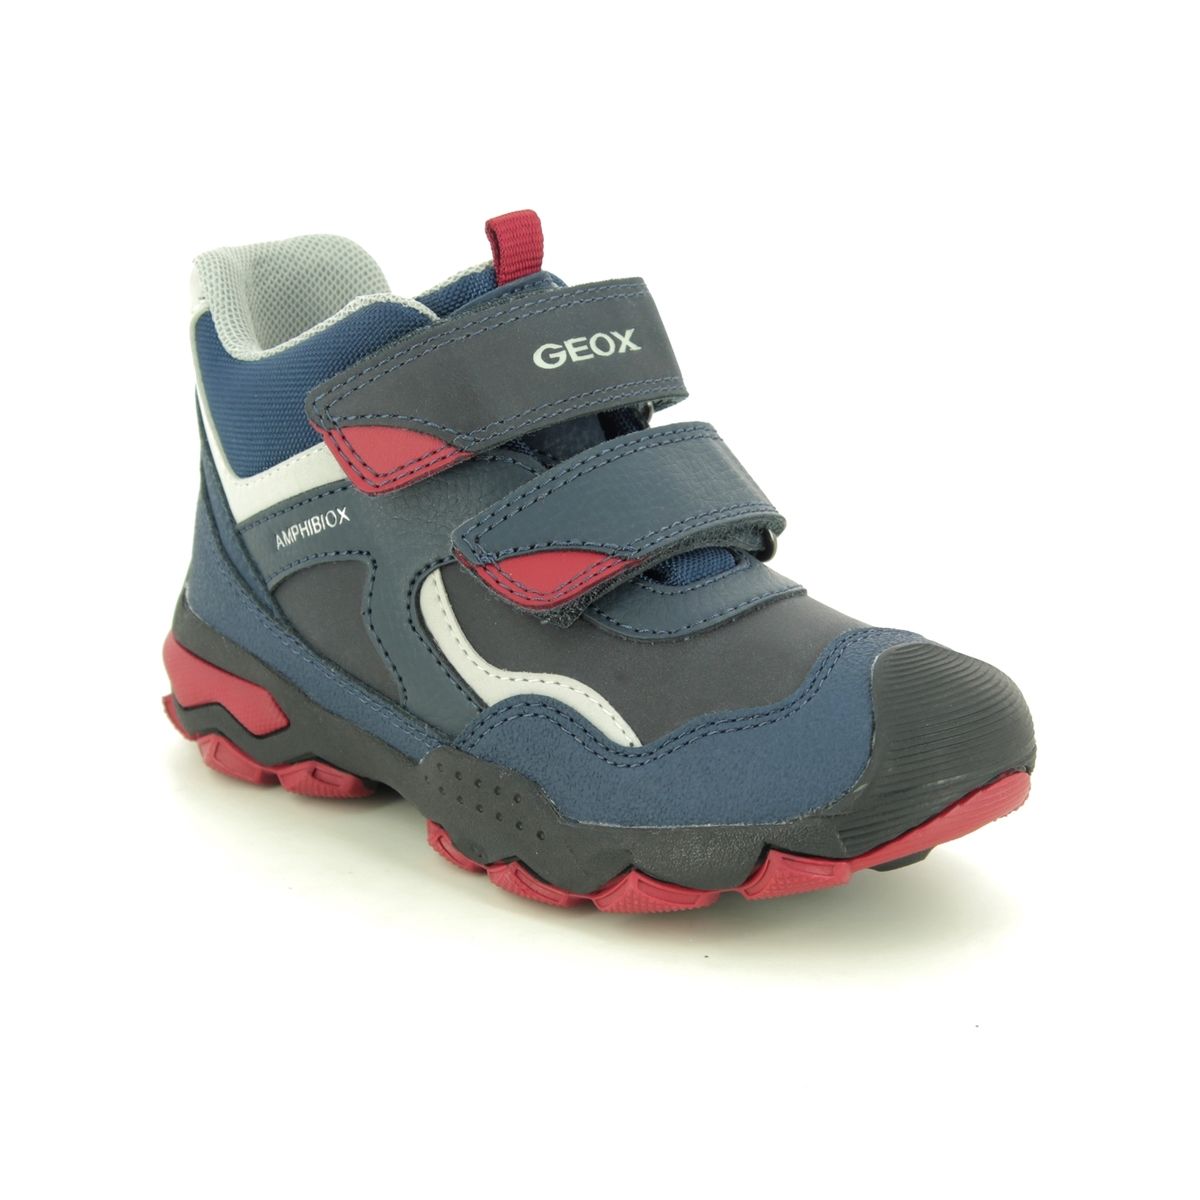 Geox - Buller Boy Tex (Navy Red) J049Wb-C4244 In Size 31 In Plain Navy Red For kids